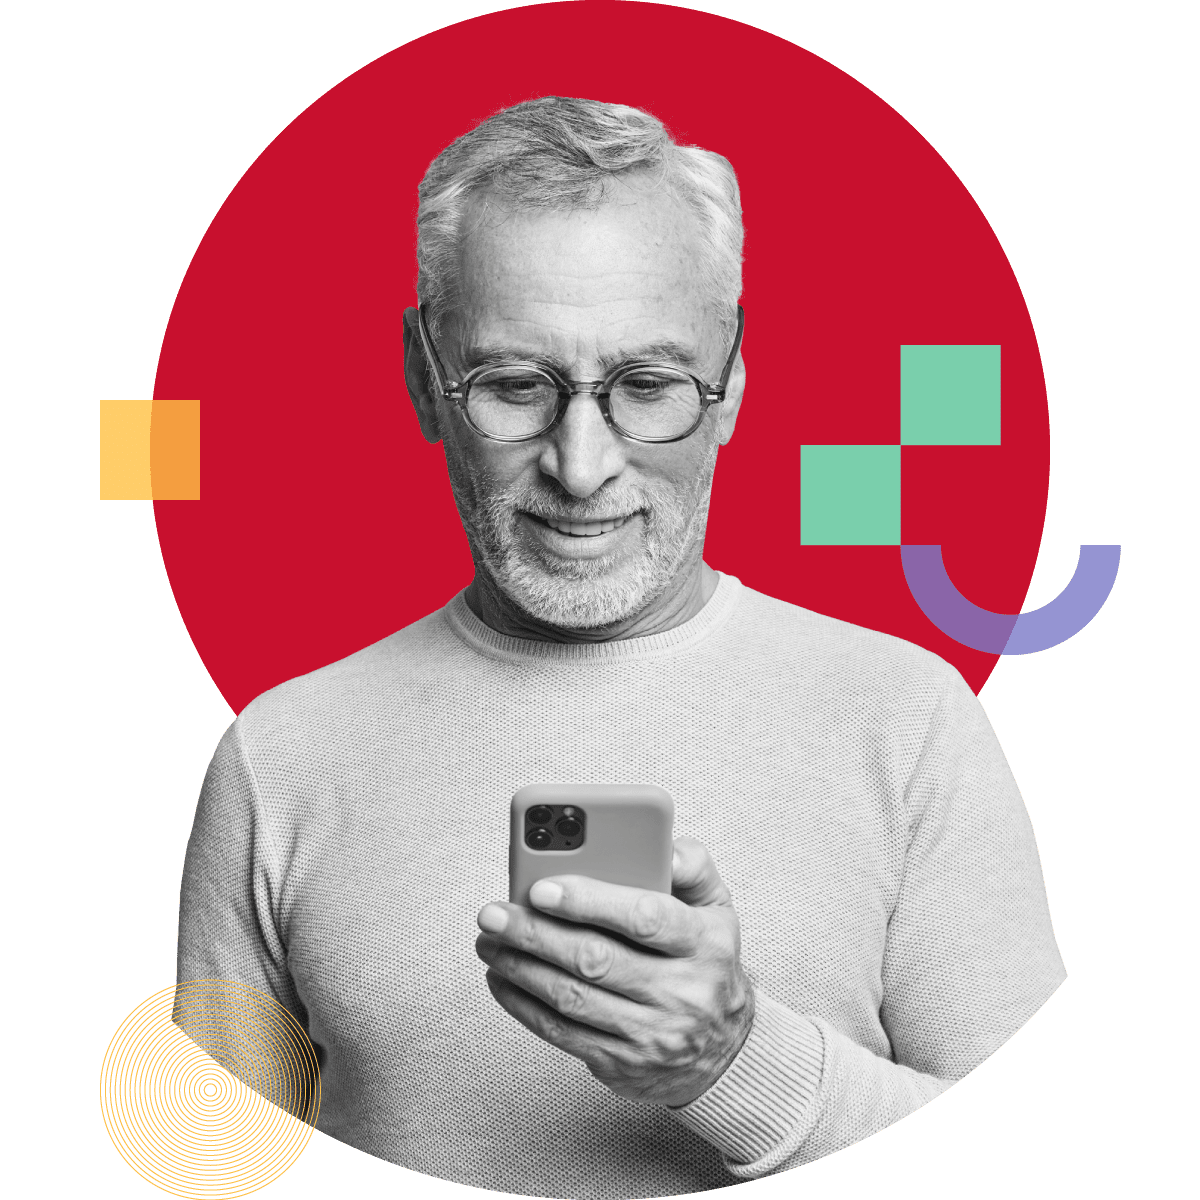 White mature man smiling on his phone portrait in black and white on red circle with decorative branding assets representing Startups by ipulse marketing